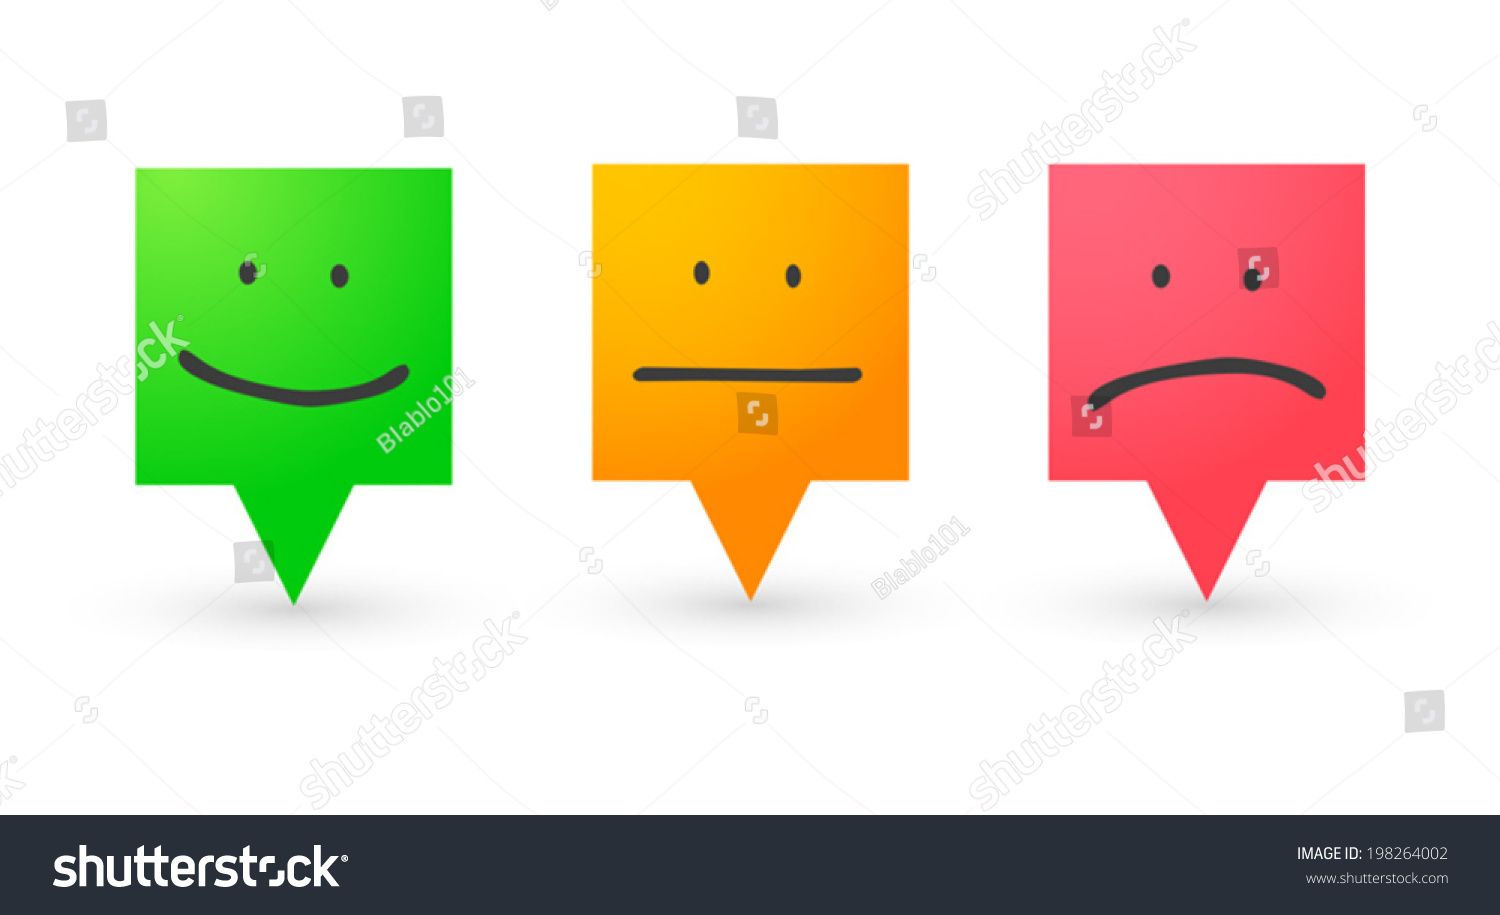 Illustration Isolated Tooltip Icon Set Stock Vector Royalty Free 198264002 Shutterstock 9760